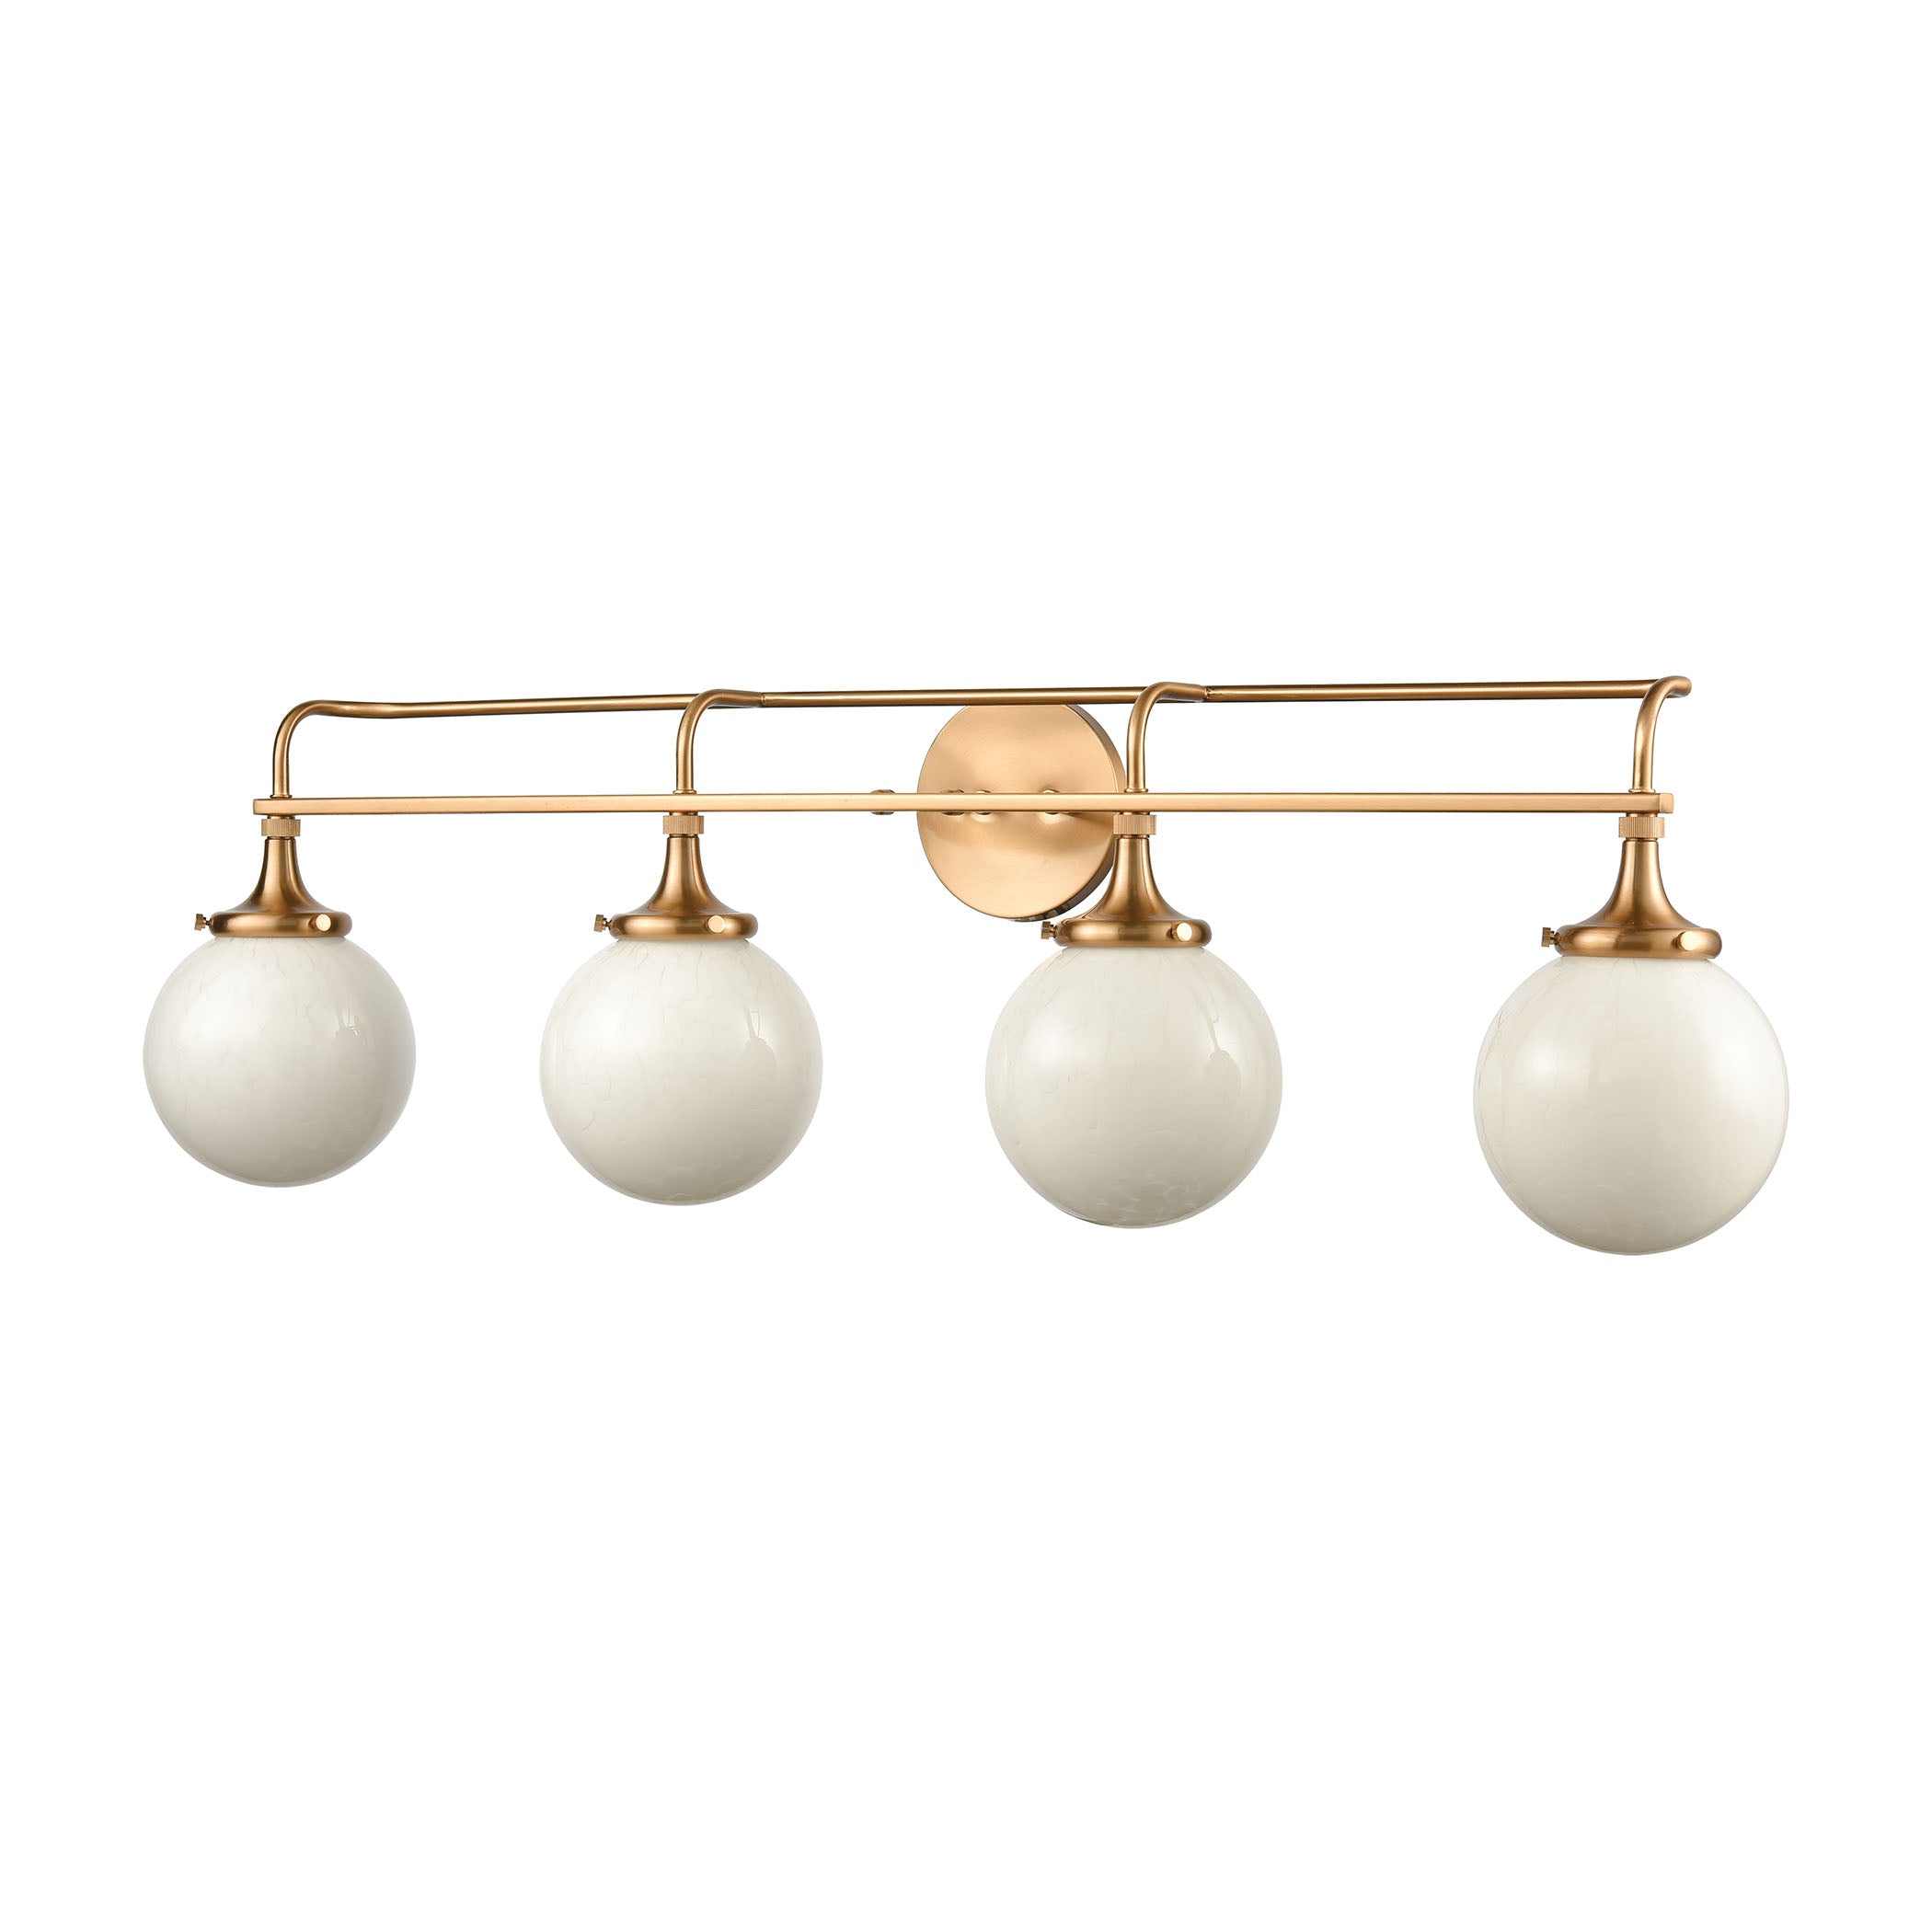 ELK Lighting 30144/4 Beverly Hills 4-Light Vanity Light in Satin Brass with White Feathered Glass